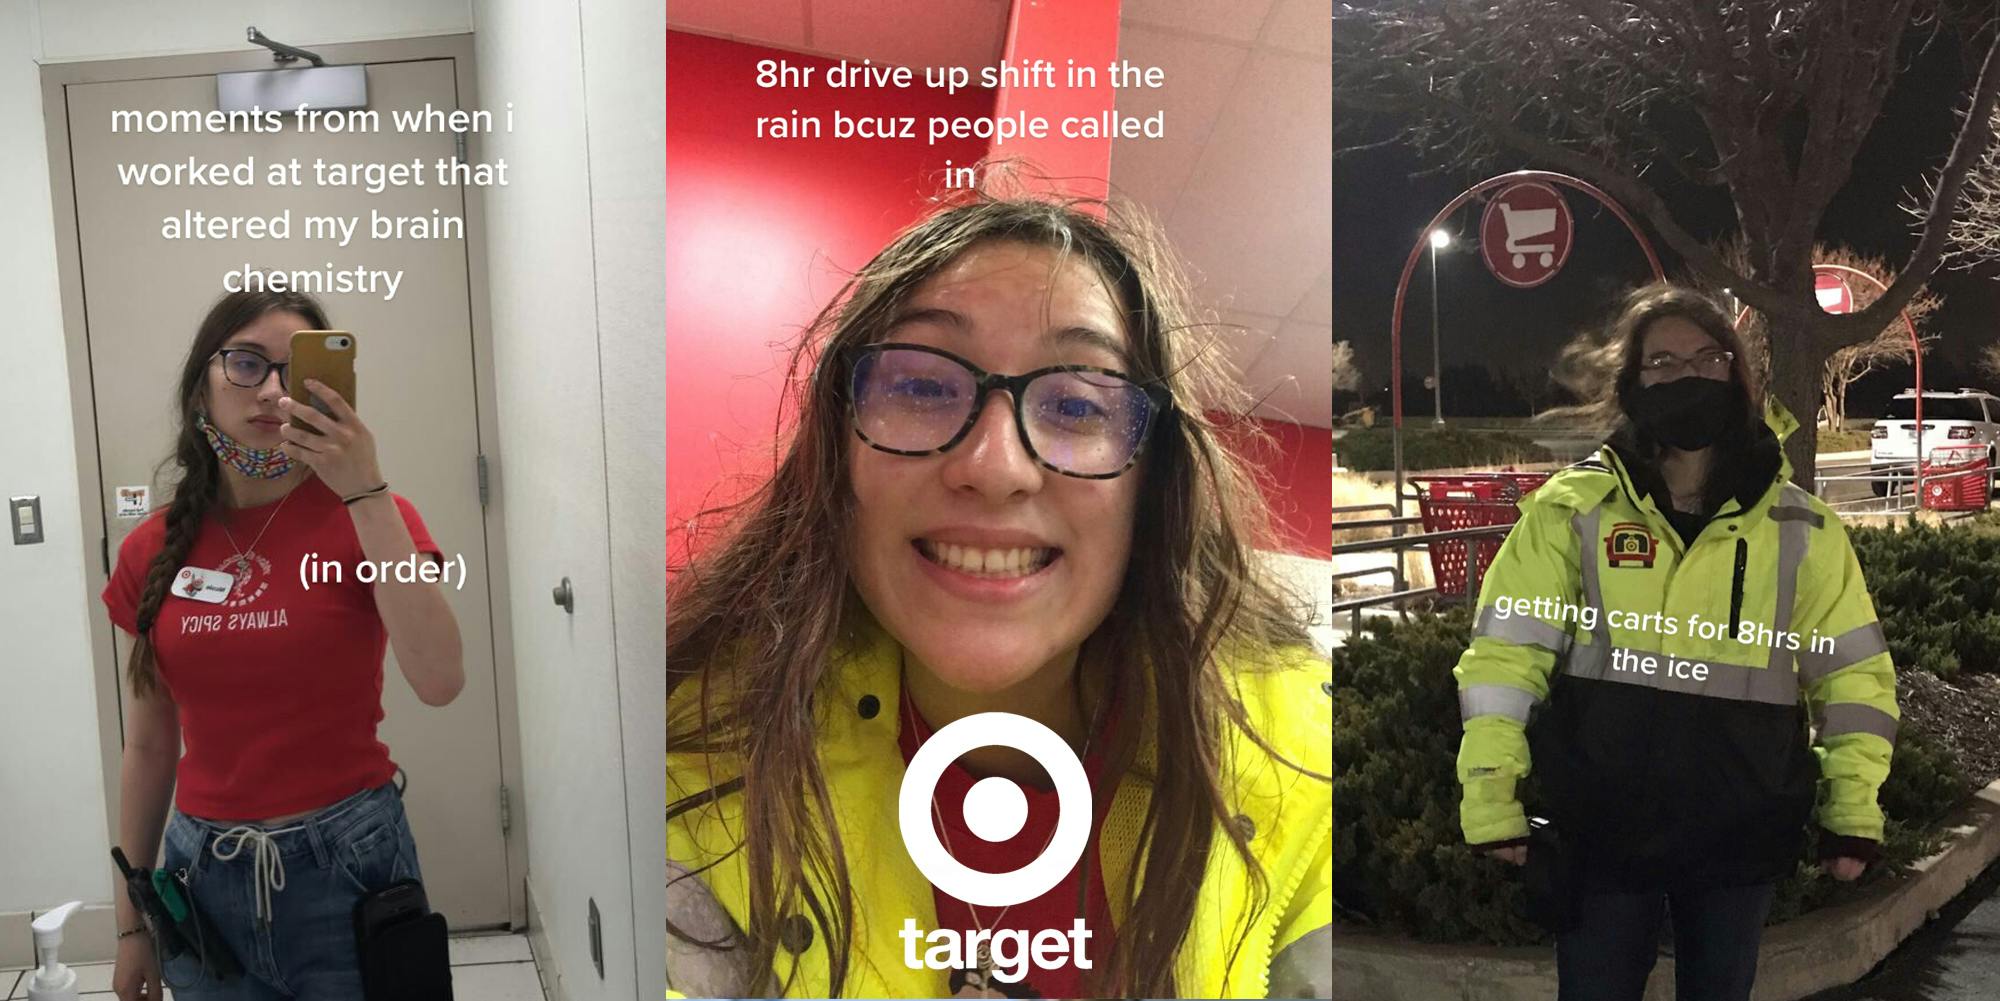 Target employee taking selfie caption "moments from when i worked at target that altered my brain chemistry (in order)" (l) Target employee with Target logo white caption "8hr drive up shift in the rain bcuz people called in" (c) Target employee outside in parking lot caption "getting carts for 8hrs in the ice" (r)